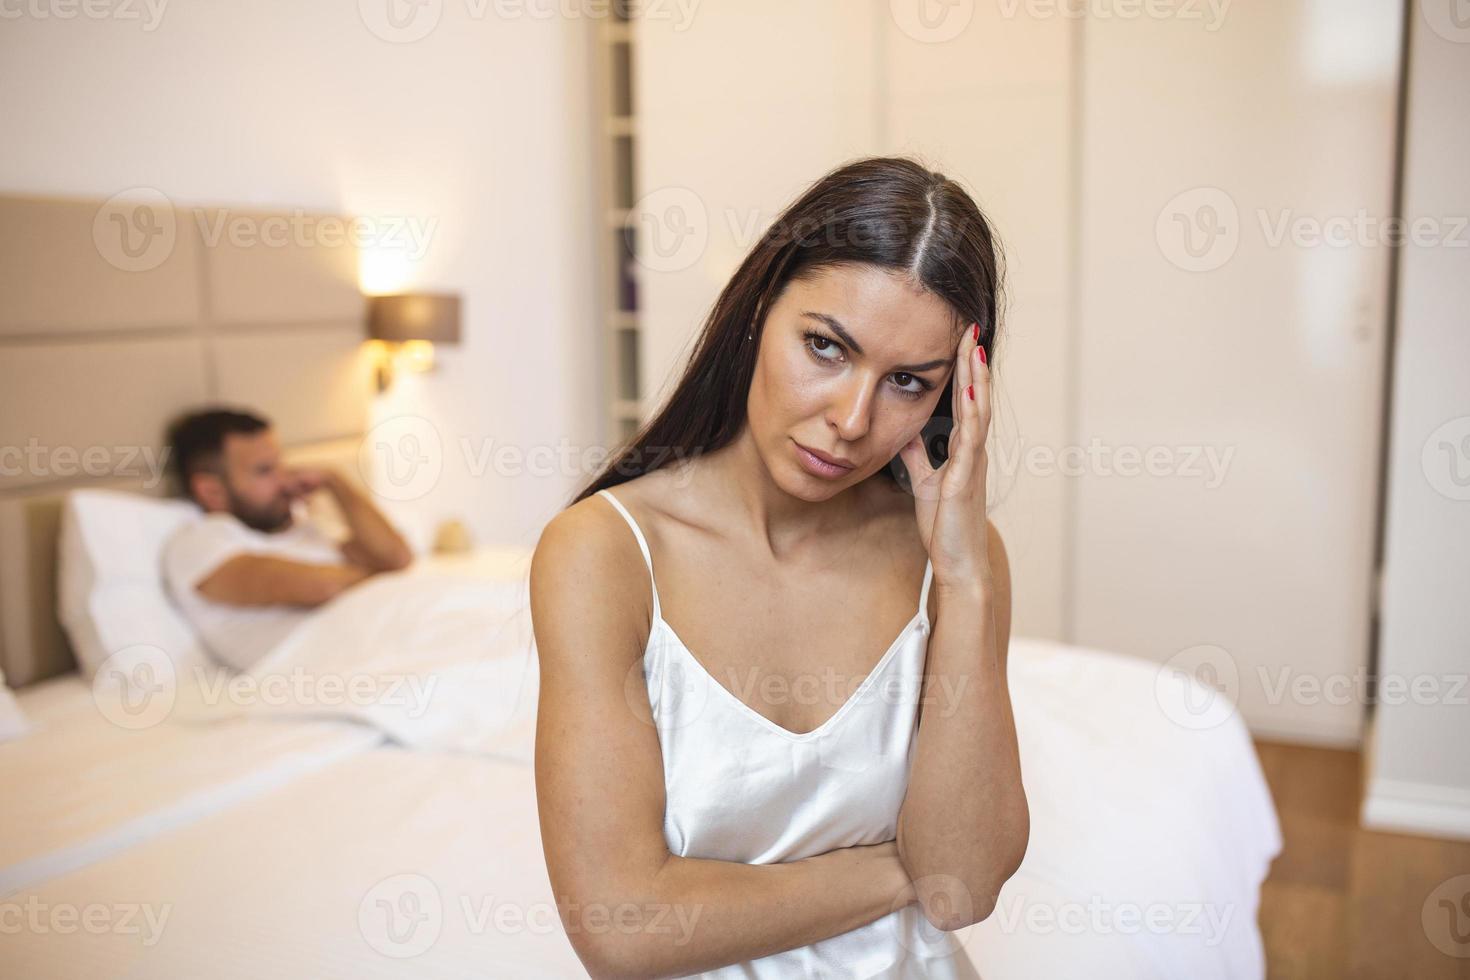 Couple quarreling due to jealousy in relationship at home, young couple with relationship problem appear depressed and frustrated photo